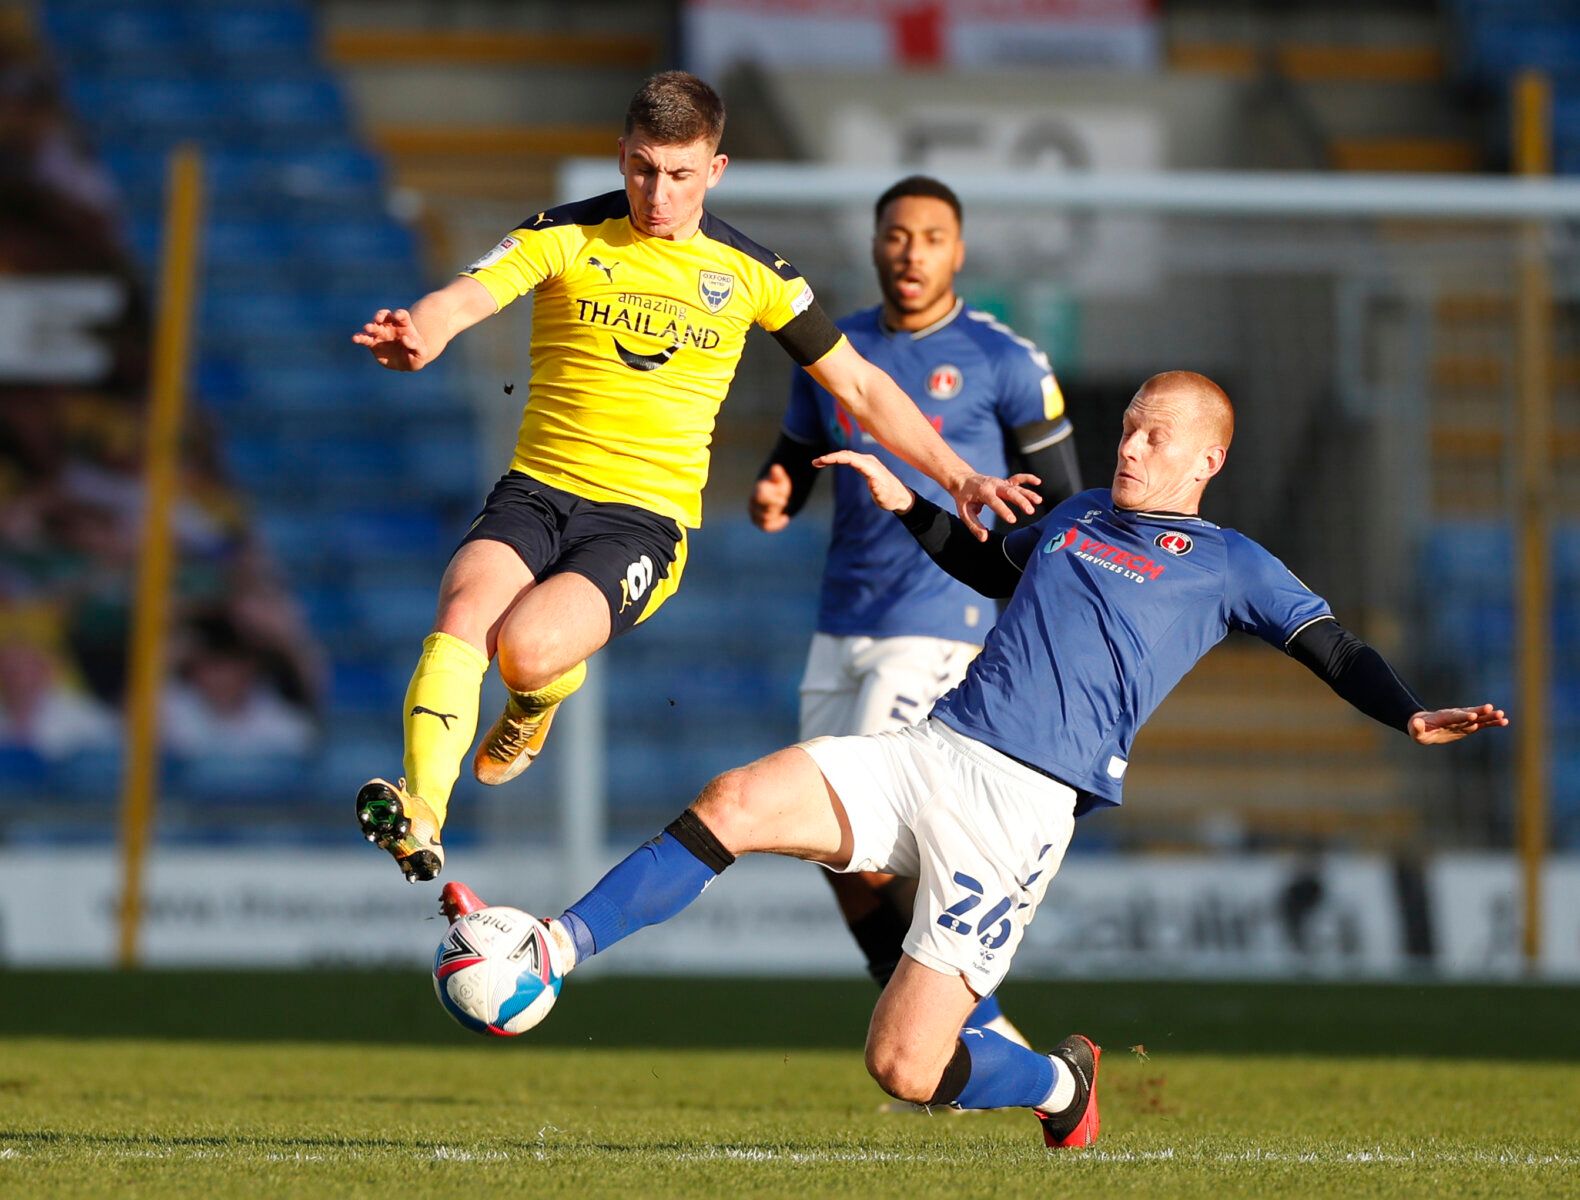 Soccer Football - League One - Oxford United vs Charlton Athletic - Kassam Stadium, Oxford, Britain - March 6, 2021 Charlton Athletic's Ben Watson and Oxford United's Cameron Brannagan in action Action Images/Paul Childs EDITORIAL USE ONLY. No use with unauthorized audio, video, data, fixture lists, club/league logos or 'live' services. Online in-match use limited to 75 images, no video emulation. No use in betting, games or single club /league/player publications.  Please contact your account r